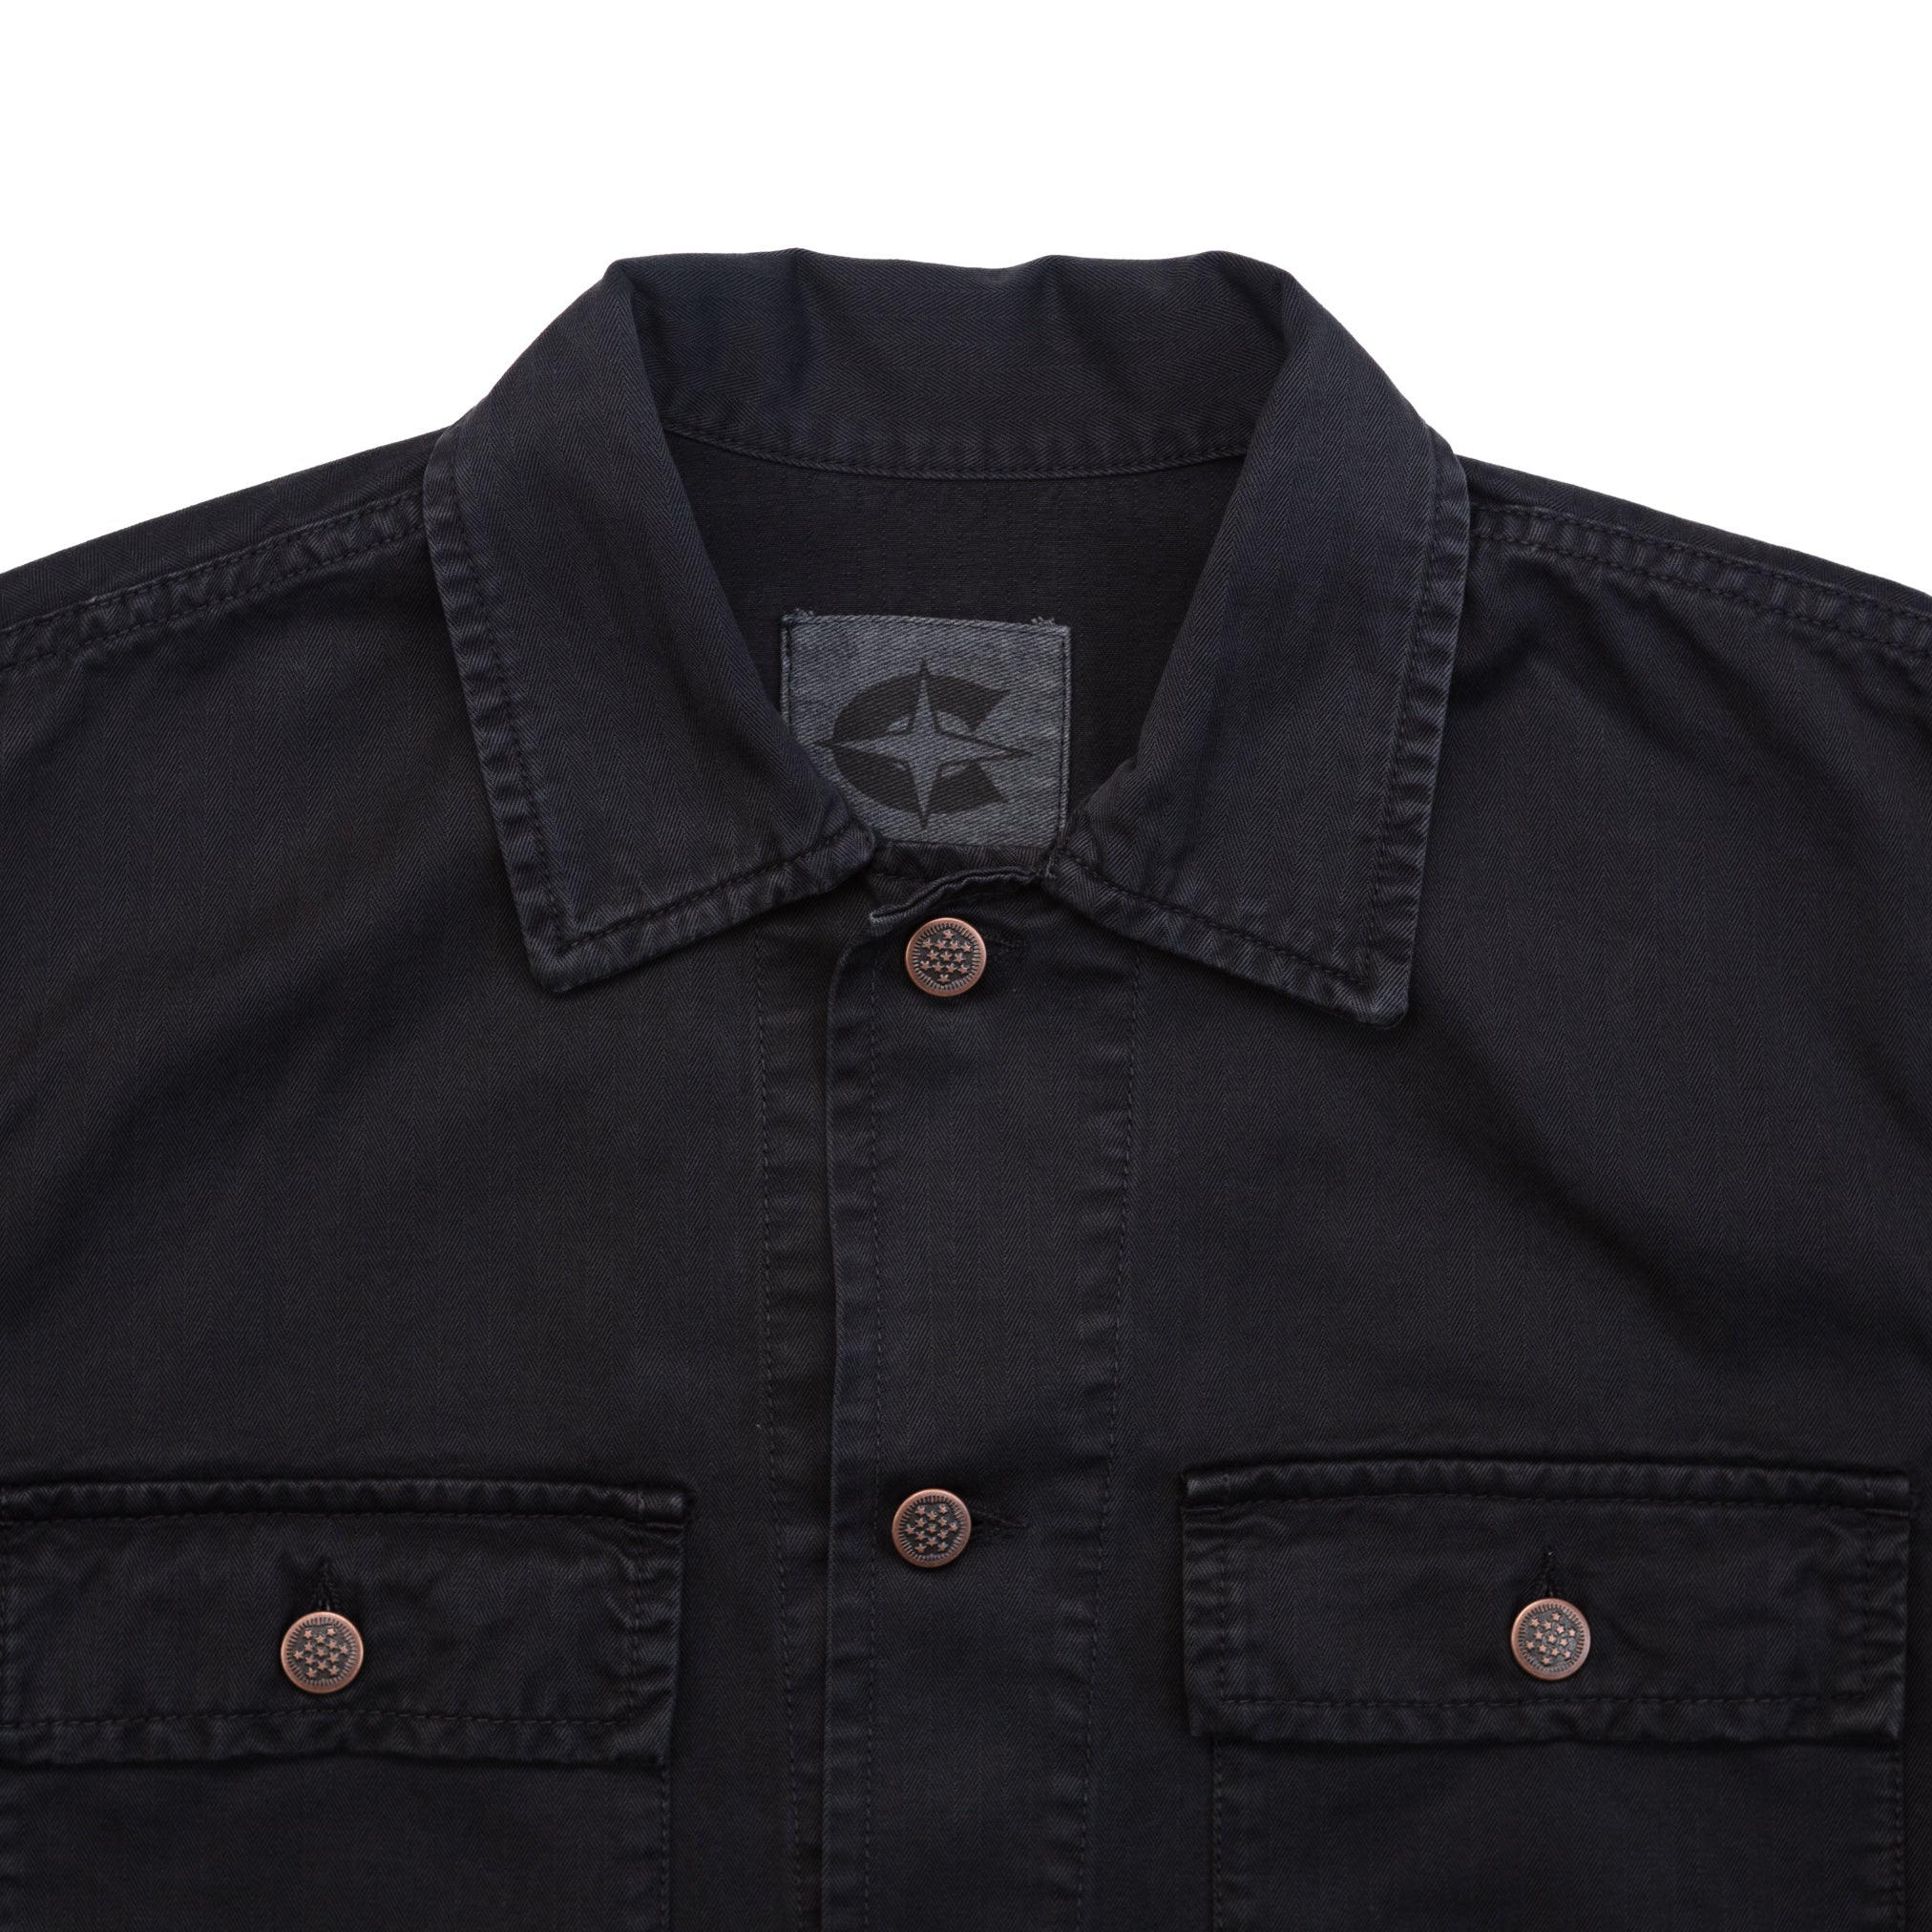 Willy's Field Shirt in Faded Black HBT